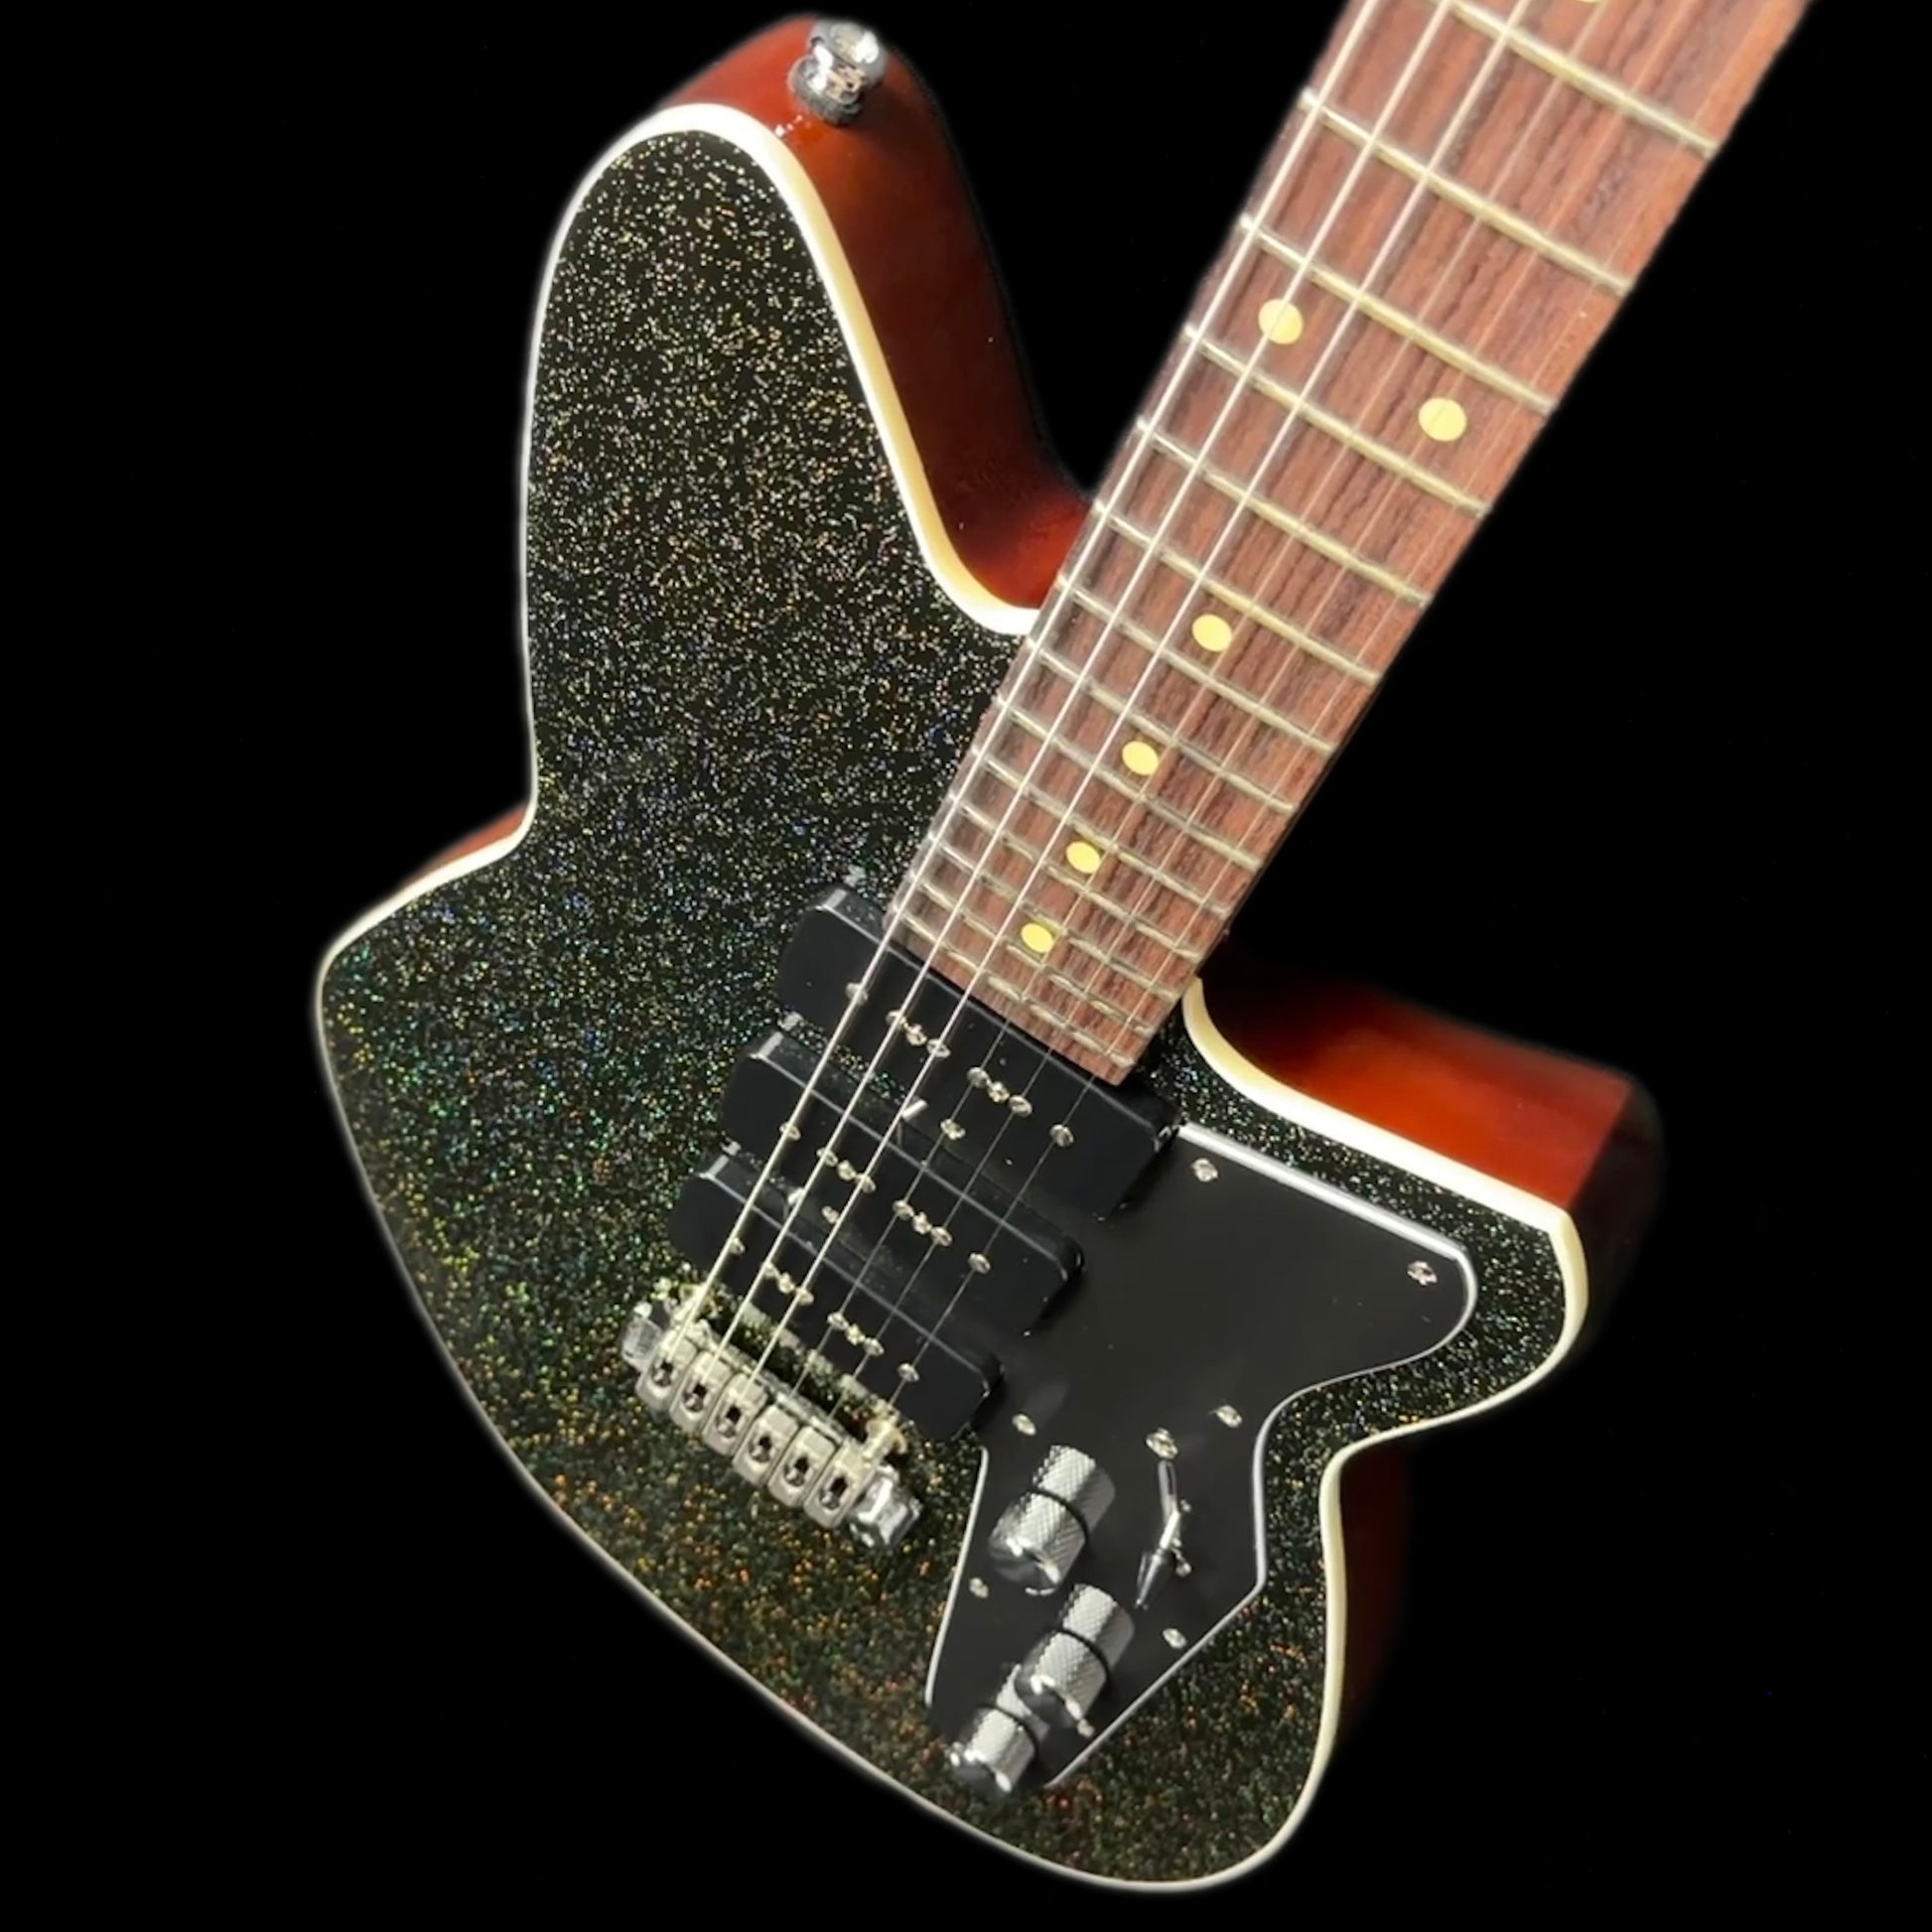 Top down angle of Reverend Jetstream 390 Tone Shop Exclusive Rainbow Sparkle.